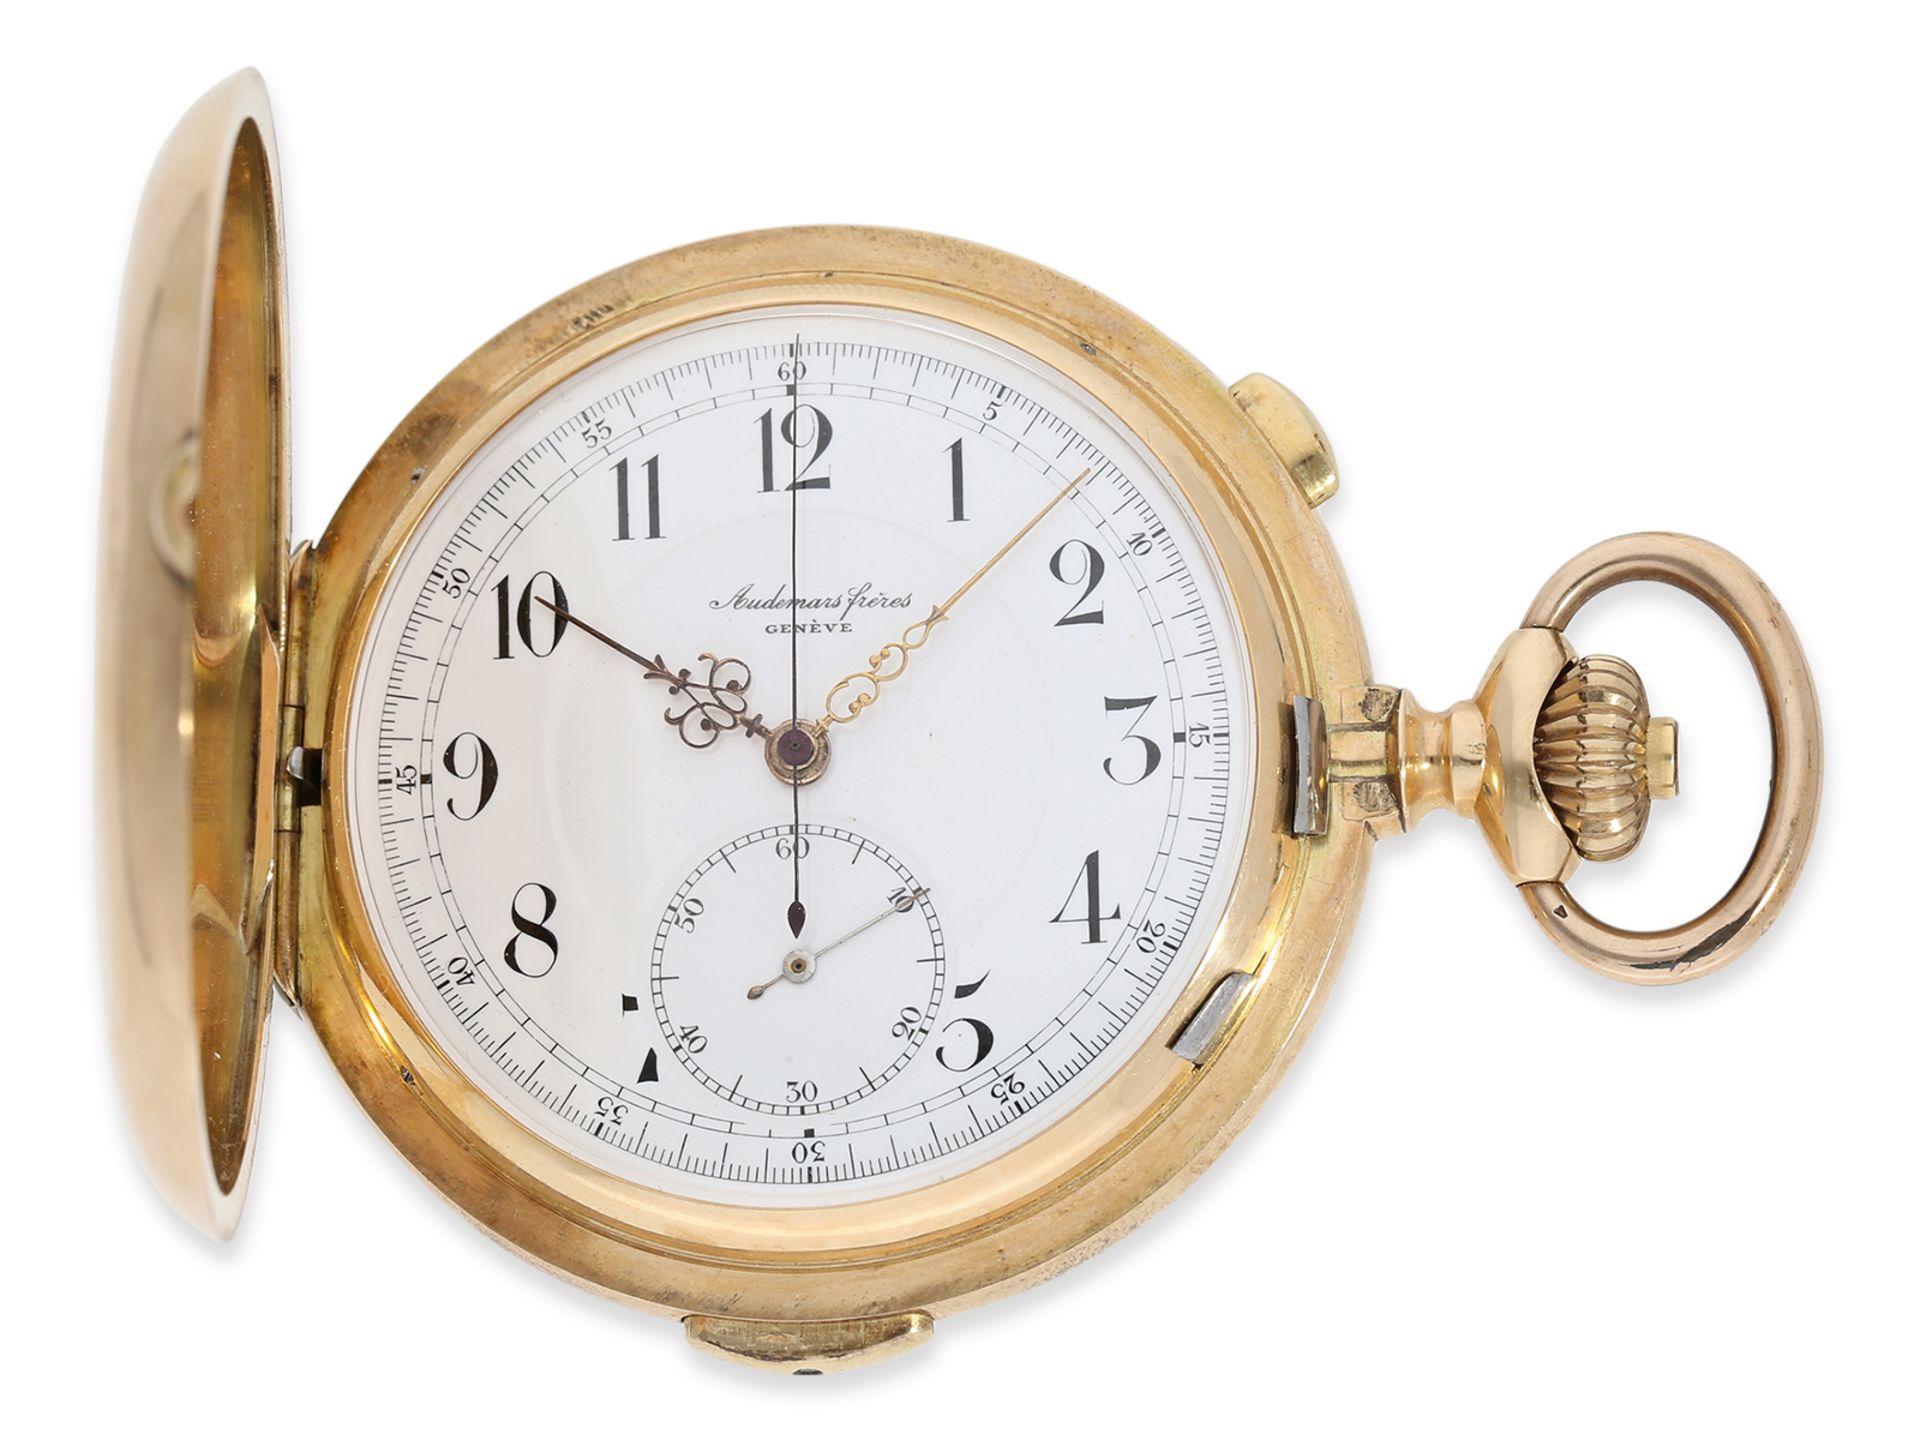 Pocket watch: impressive gold hunting case watch with repeater and chronograph, Audemars Freres Gene